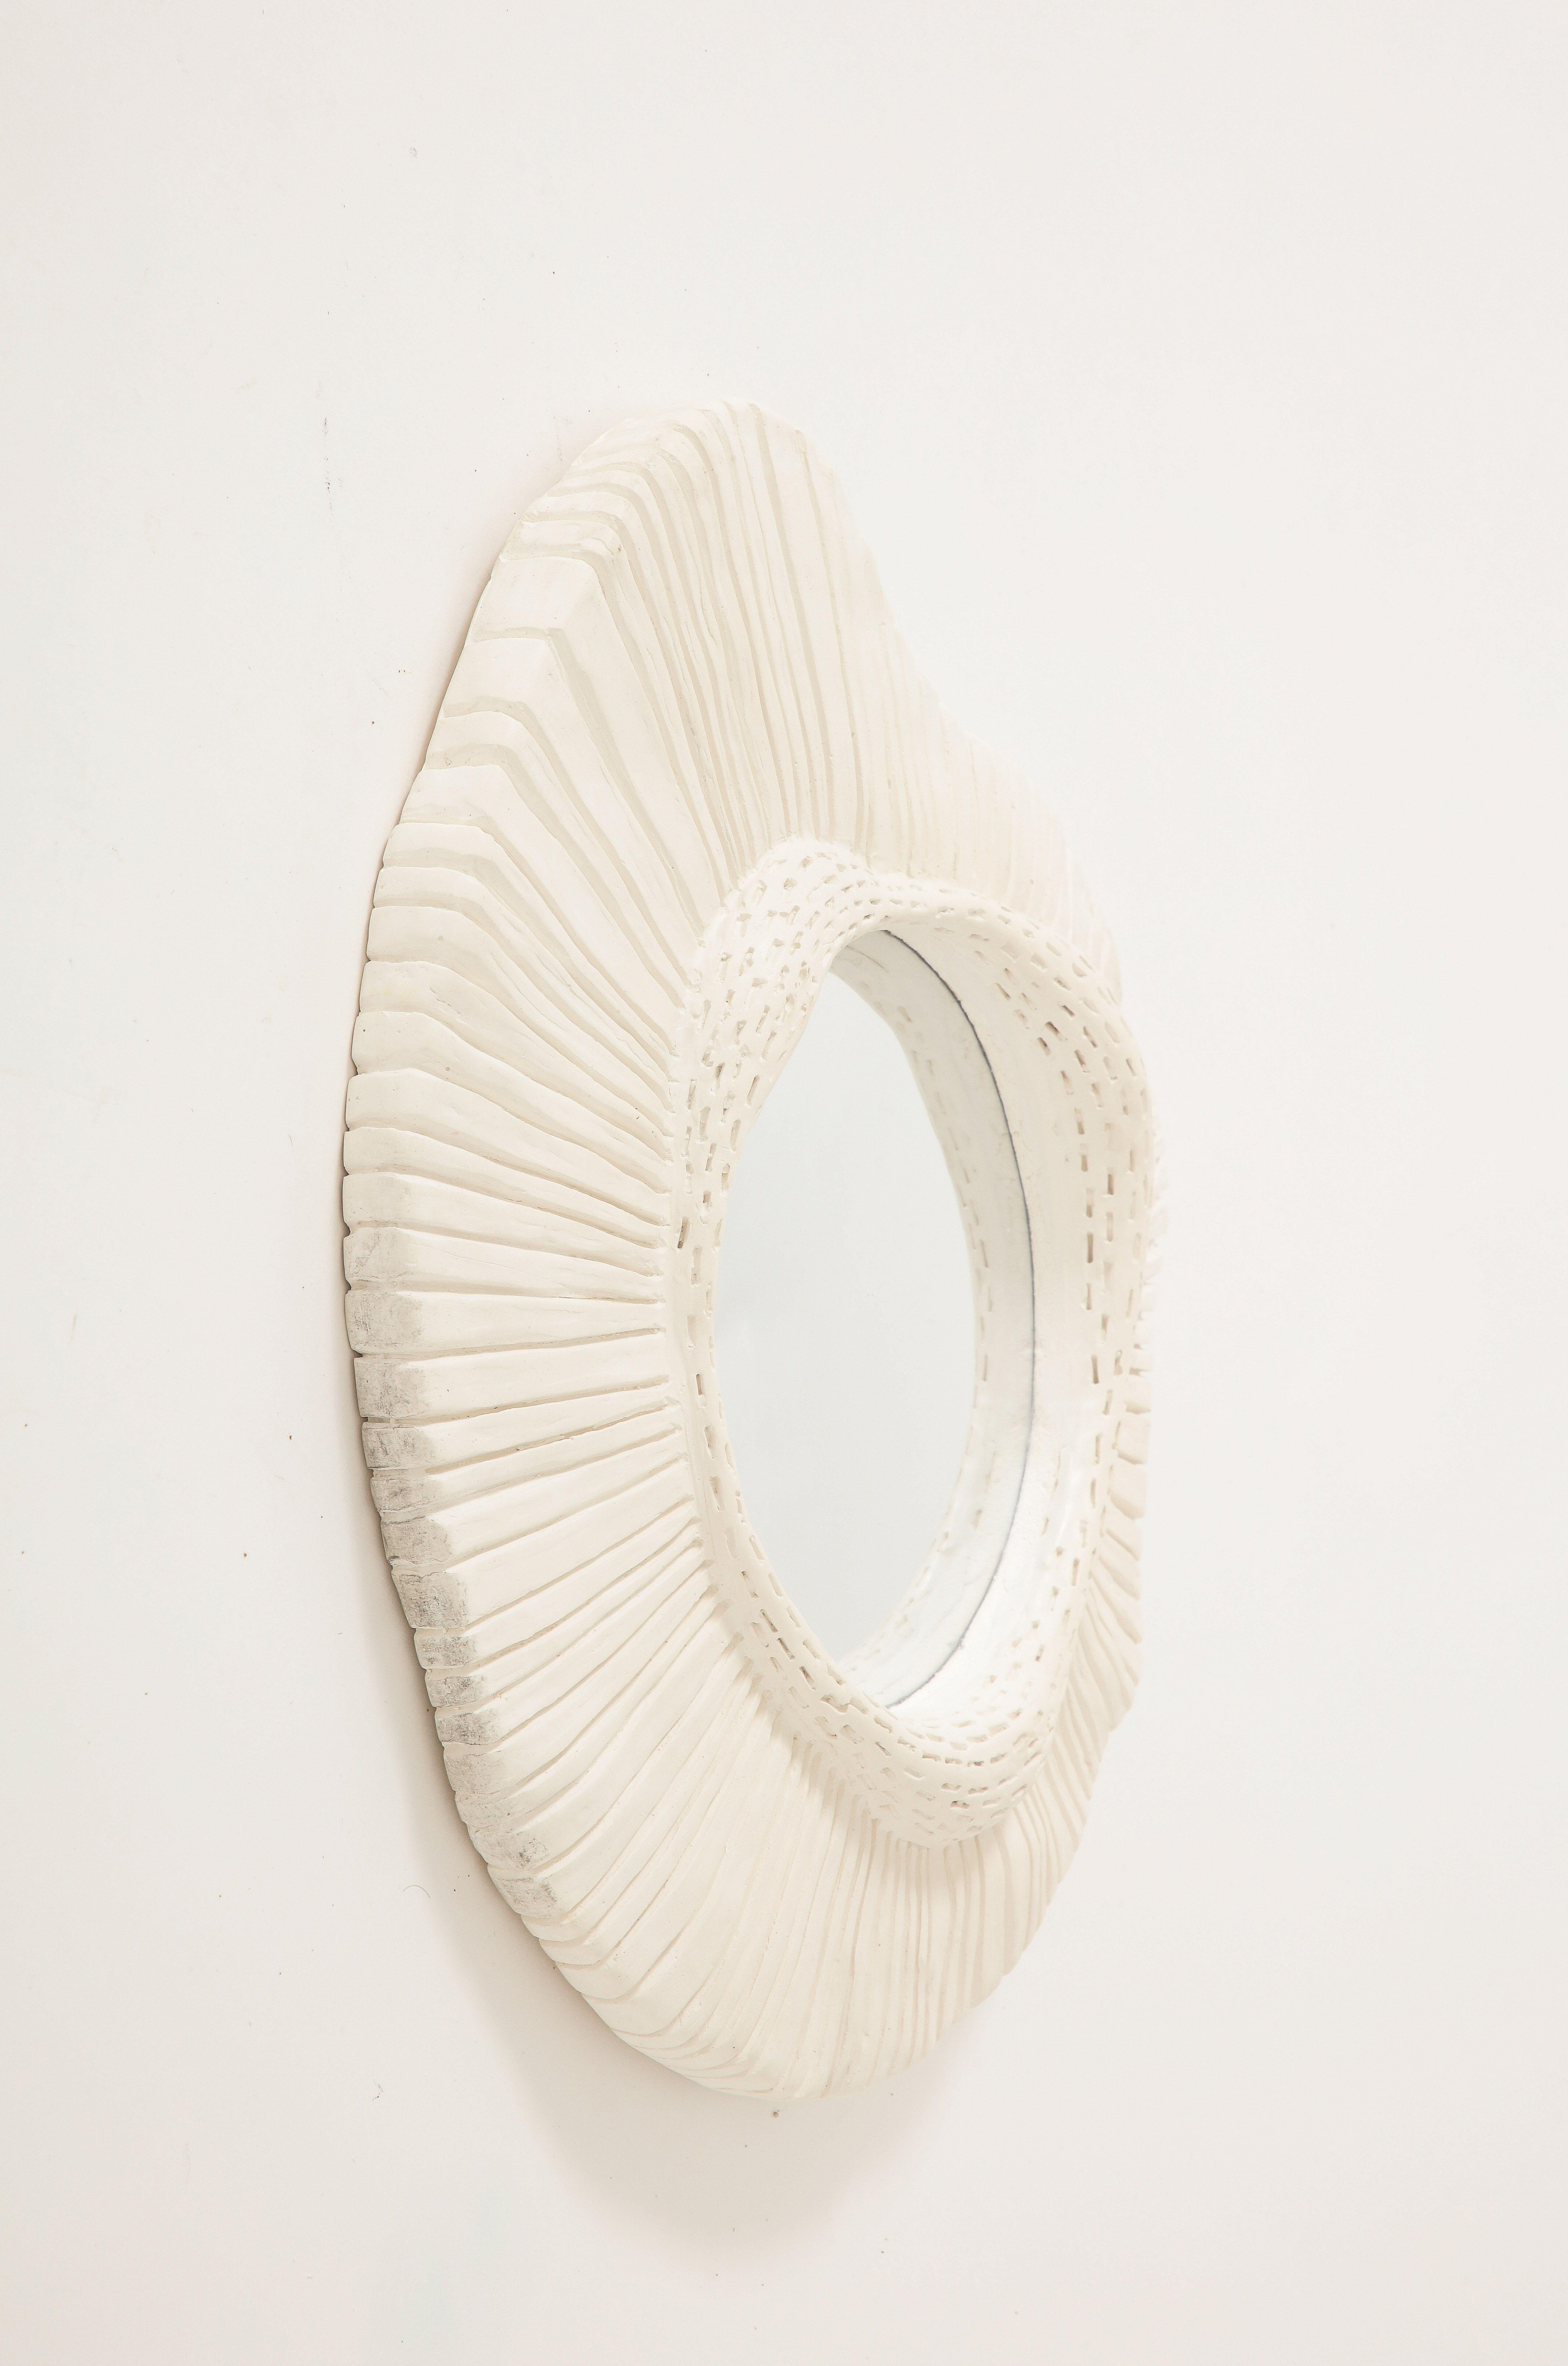 One of a series in our inventory, this carved plaster mirror with convex glass is stunning on its own or as part of a collection its asymmetrical shape and interesting texture make it a unique piece, suitable for a traditional or contemporary